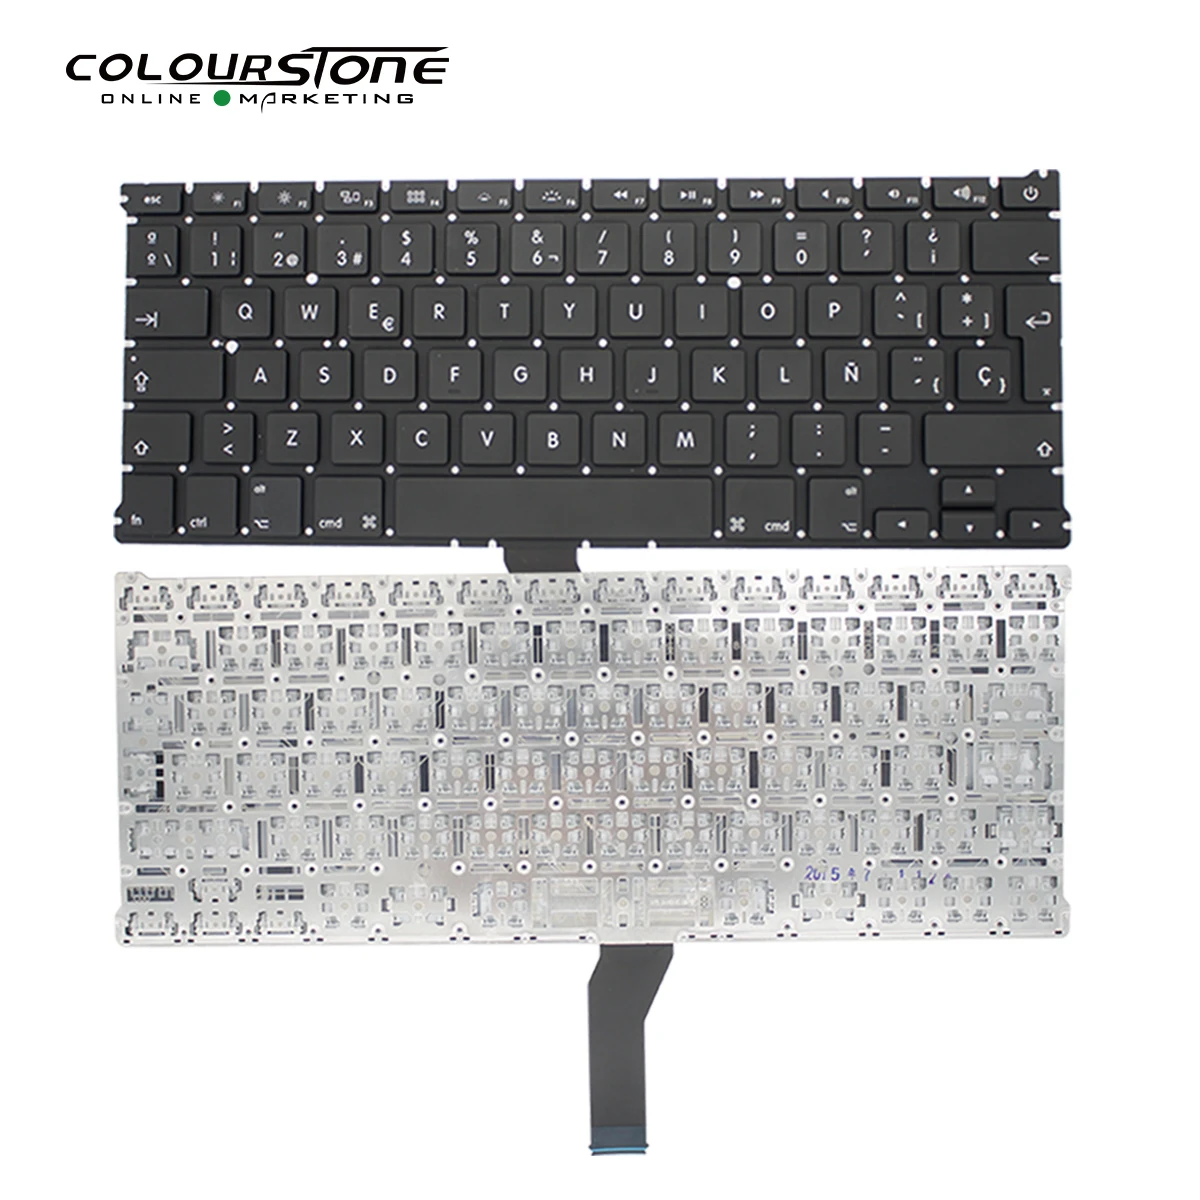 

US Replcement Keyboard For Macbook Air 13.3" A1369 A1466 MD231 MD232 MC503 MC504 2011-15 Years English Laptop Keyboard